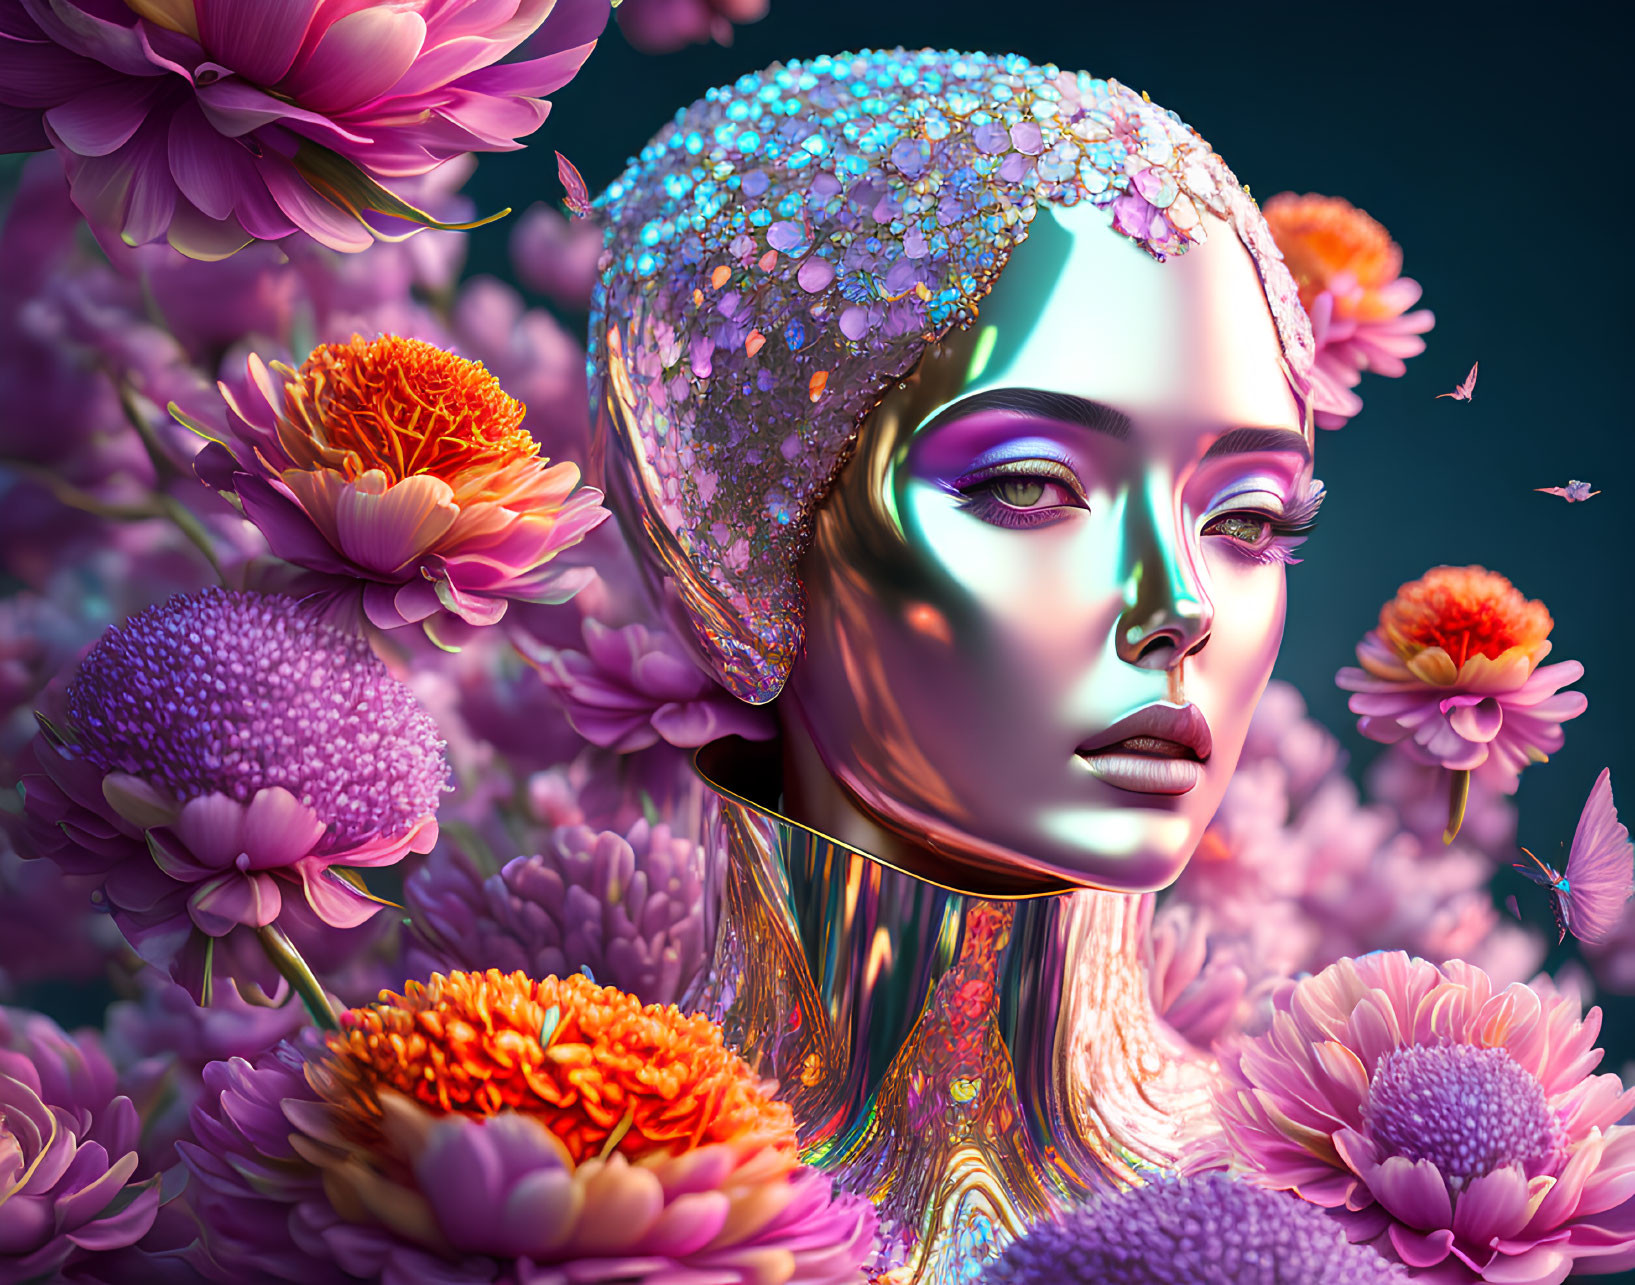 Futuristic golden female robotic figure with pink and orange flowers.